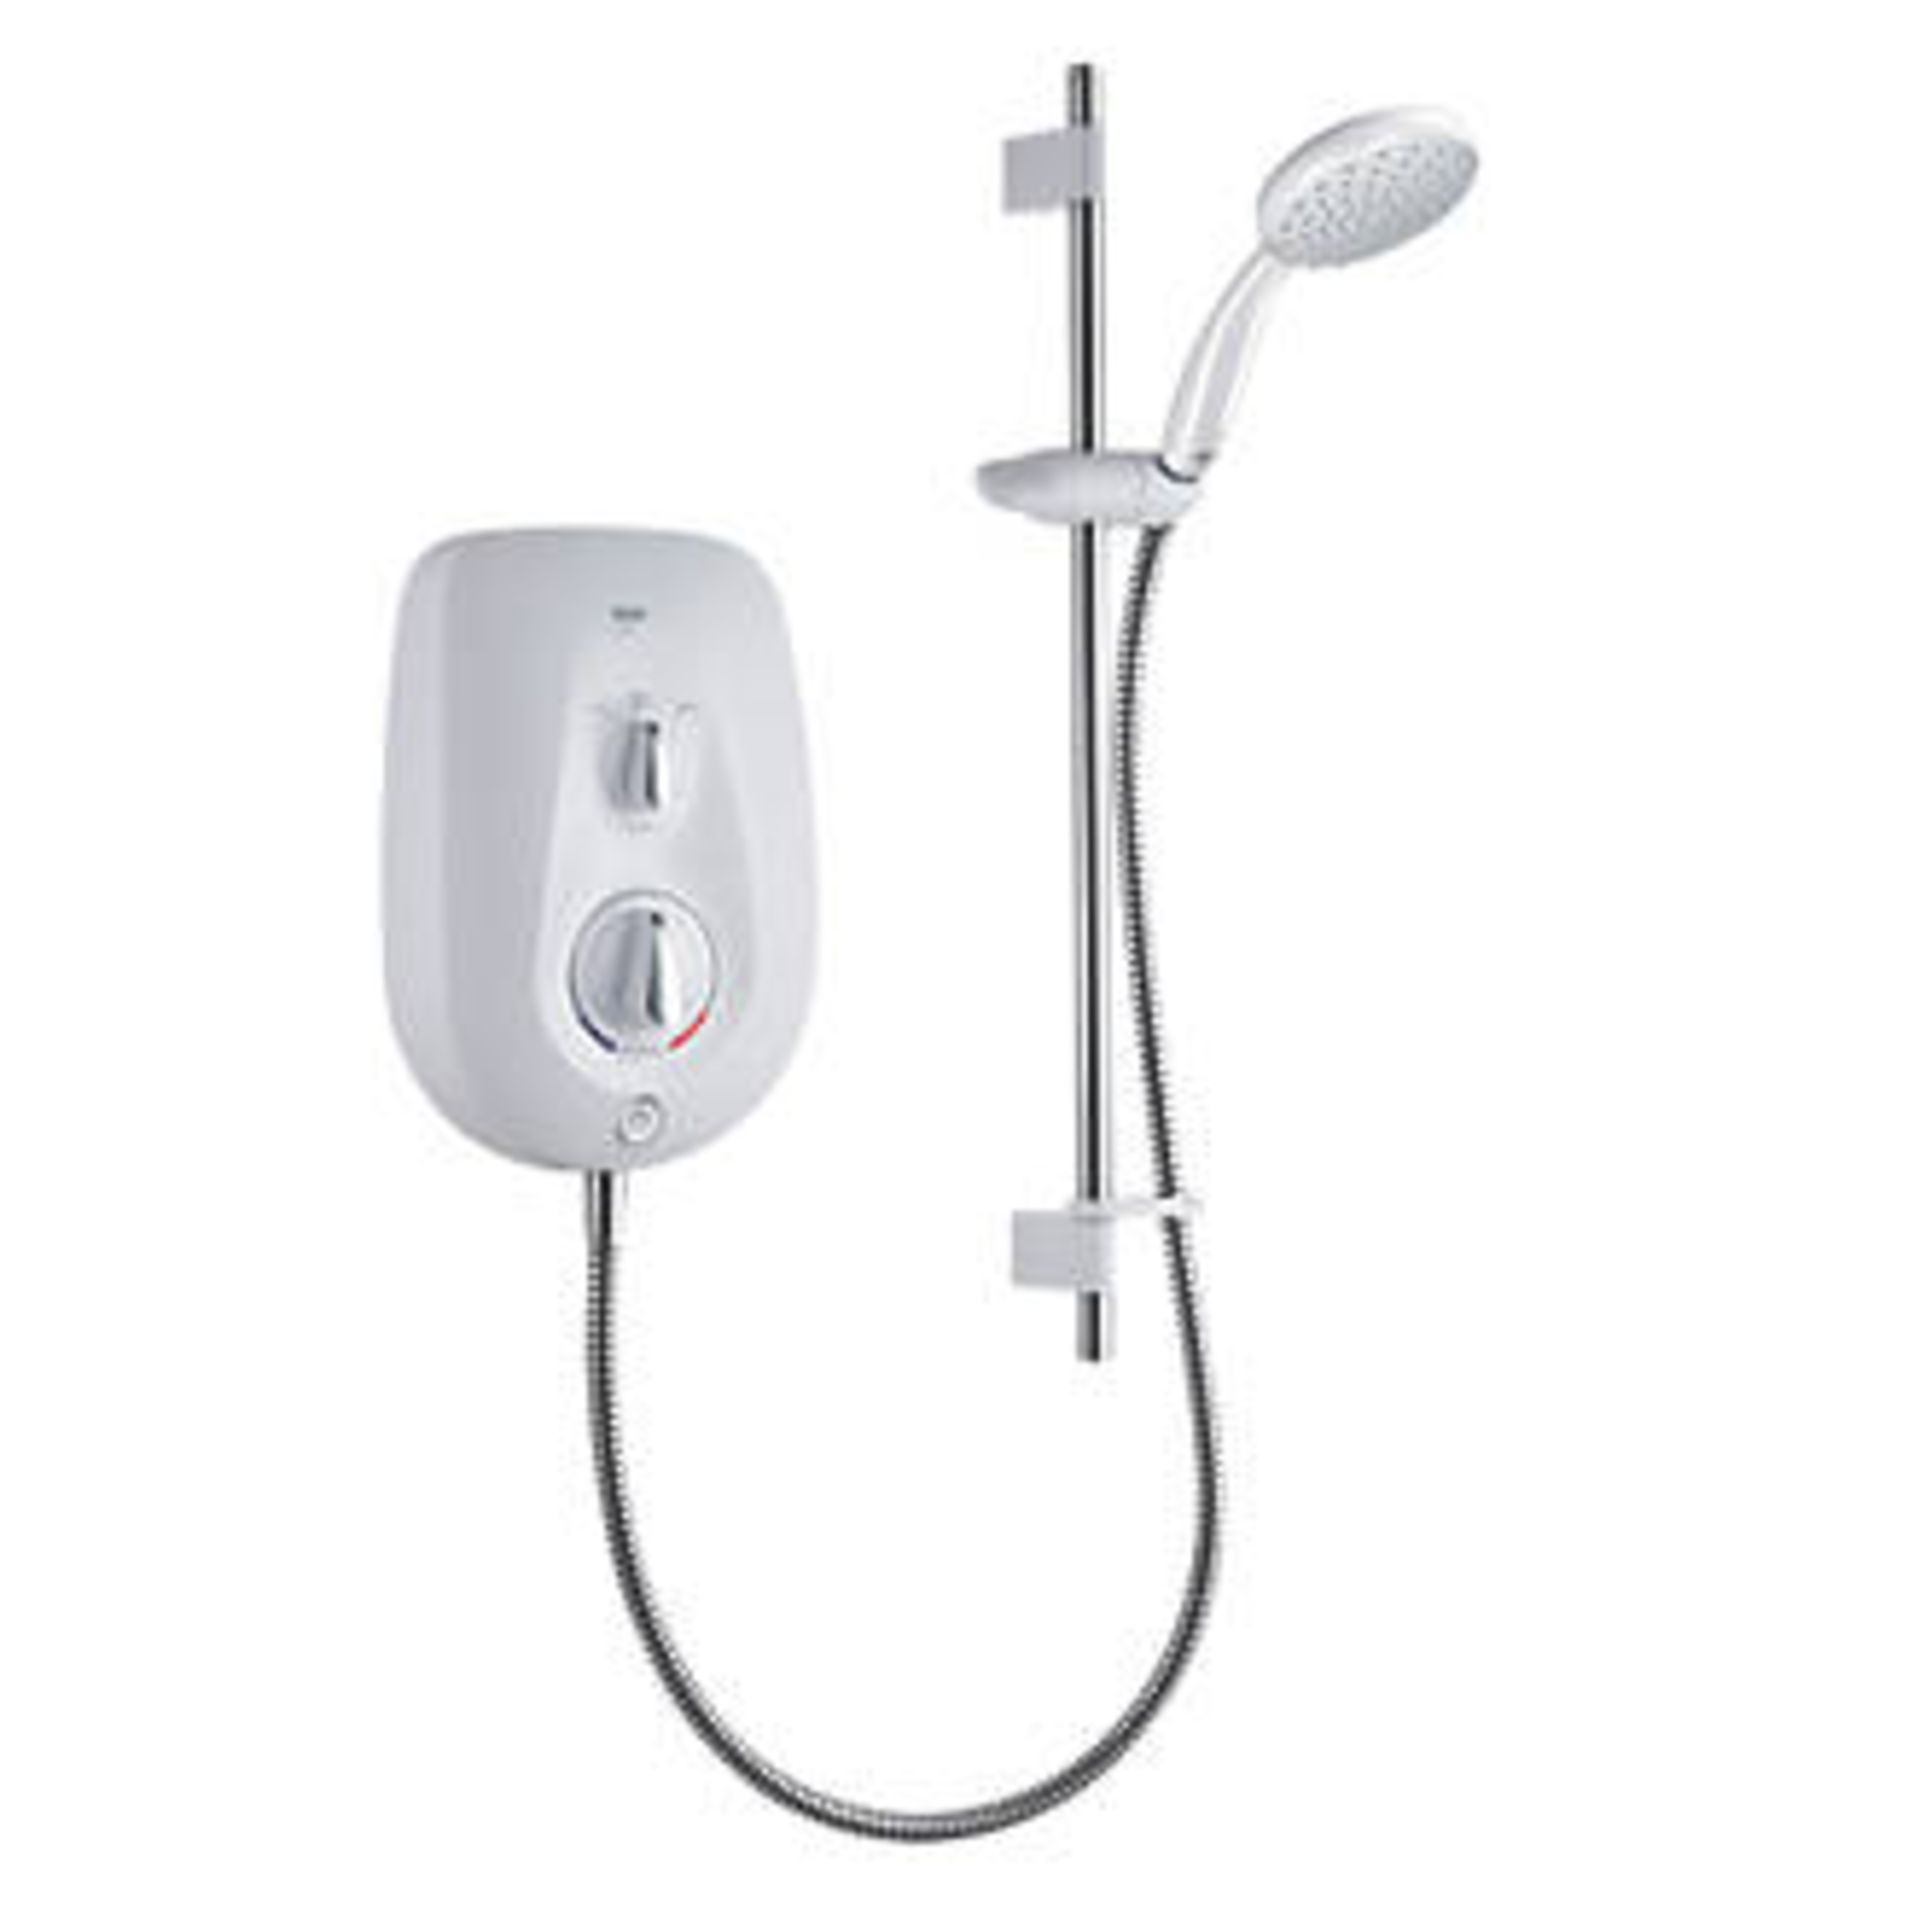 (XL67) Mira Go White 10.8kW Electric Shower. RRP £324.99. Contemporary electric shower with pr... - Image 2 of 4